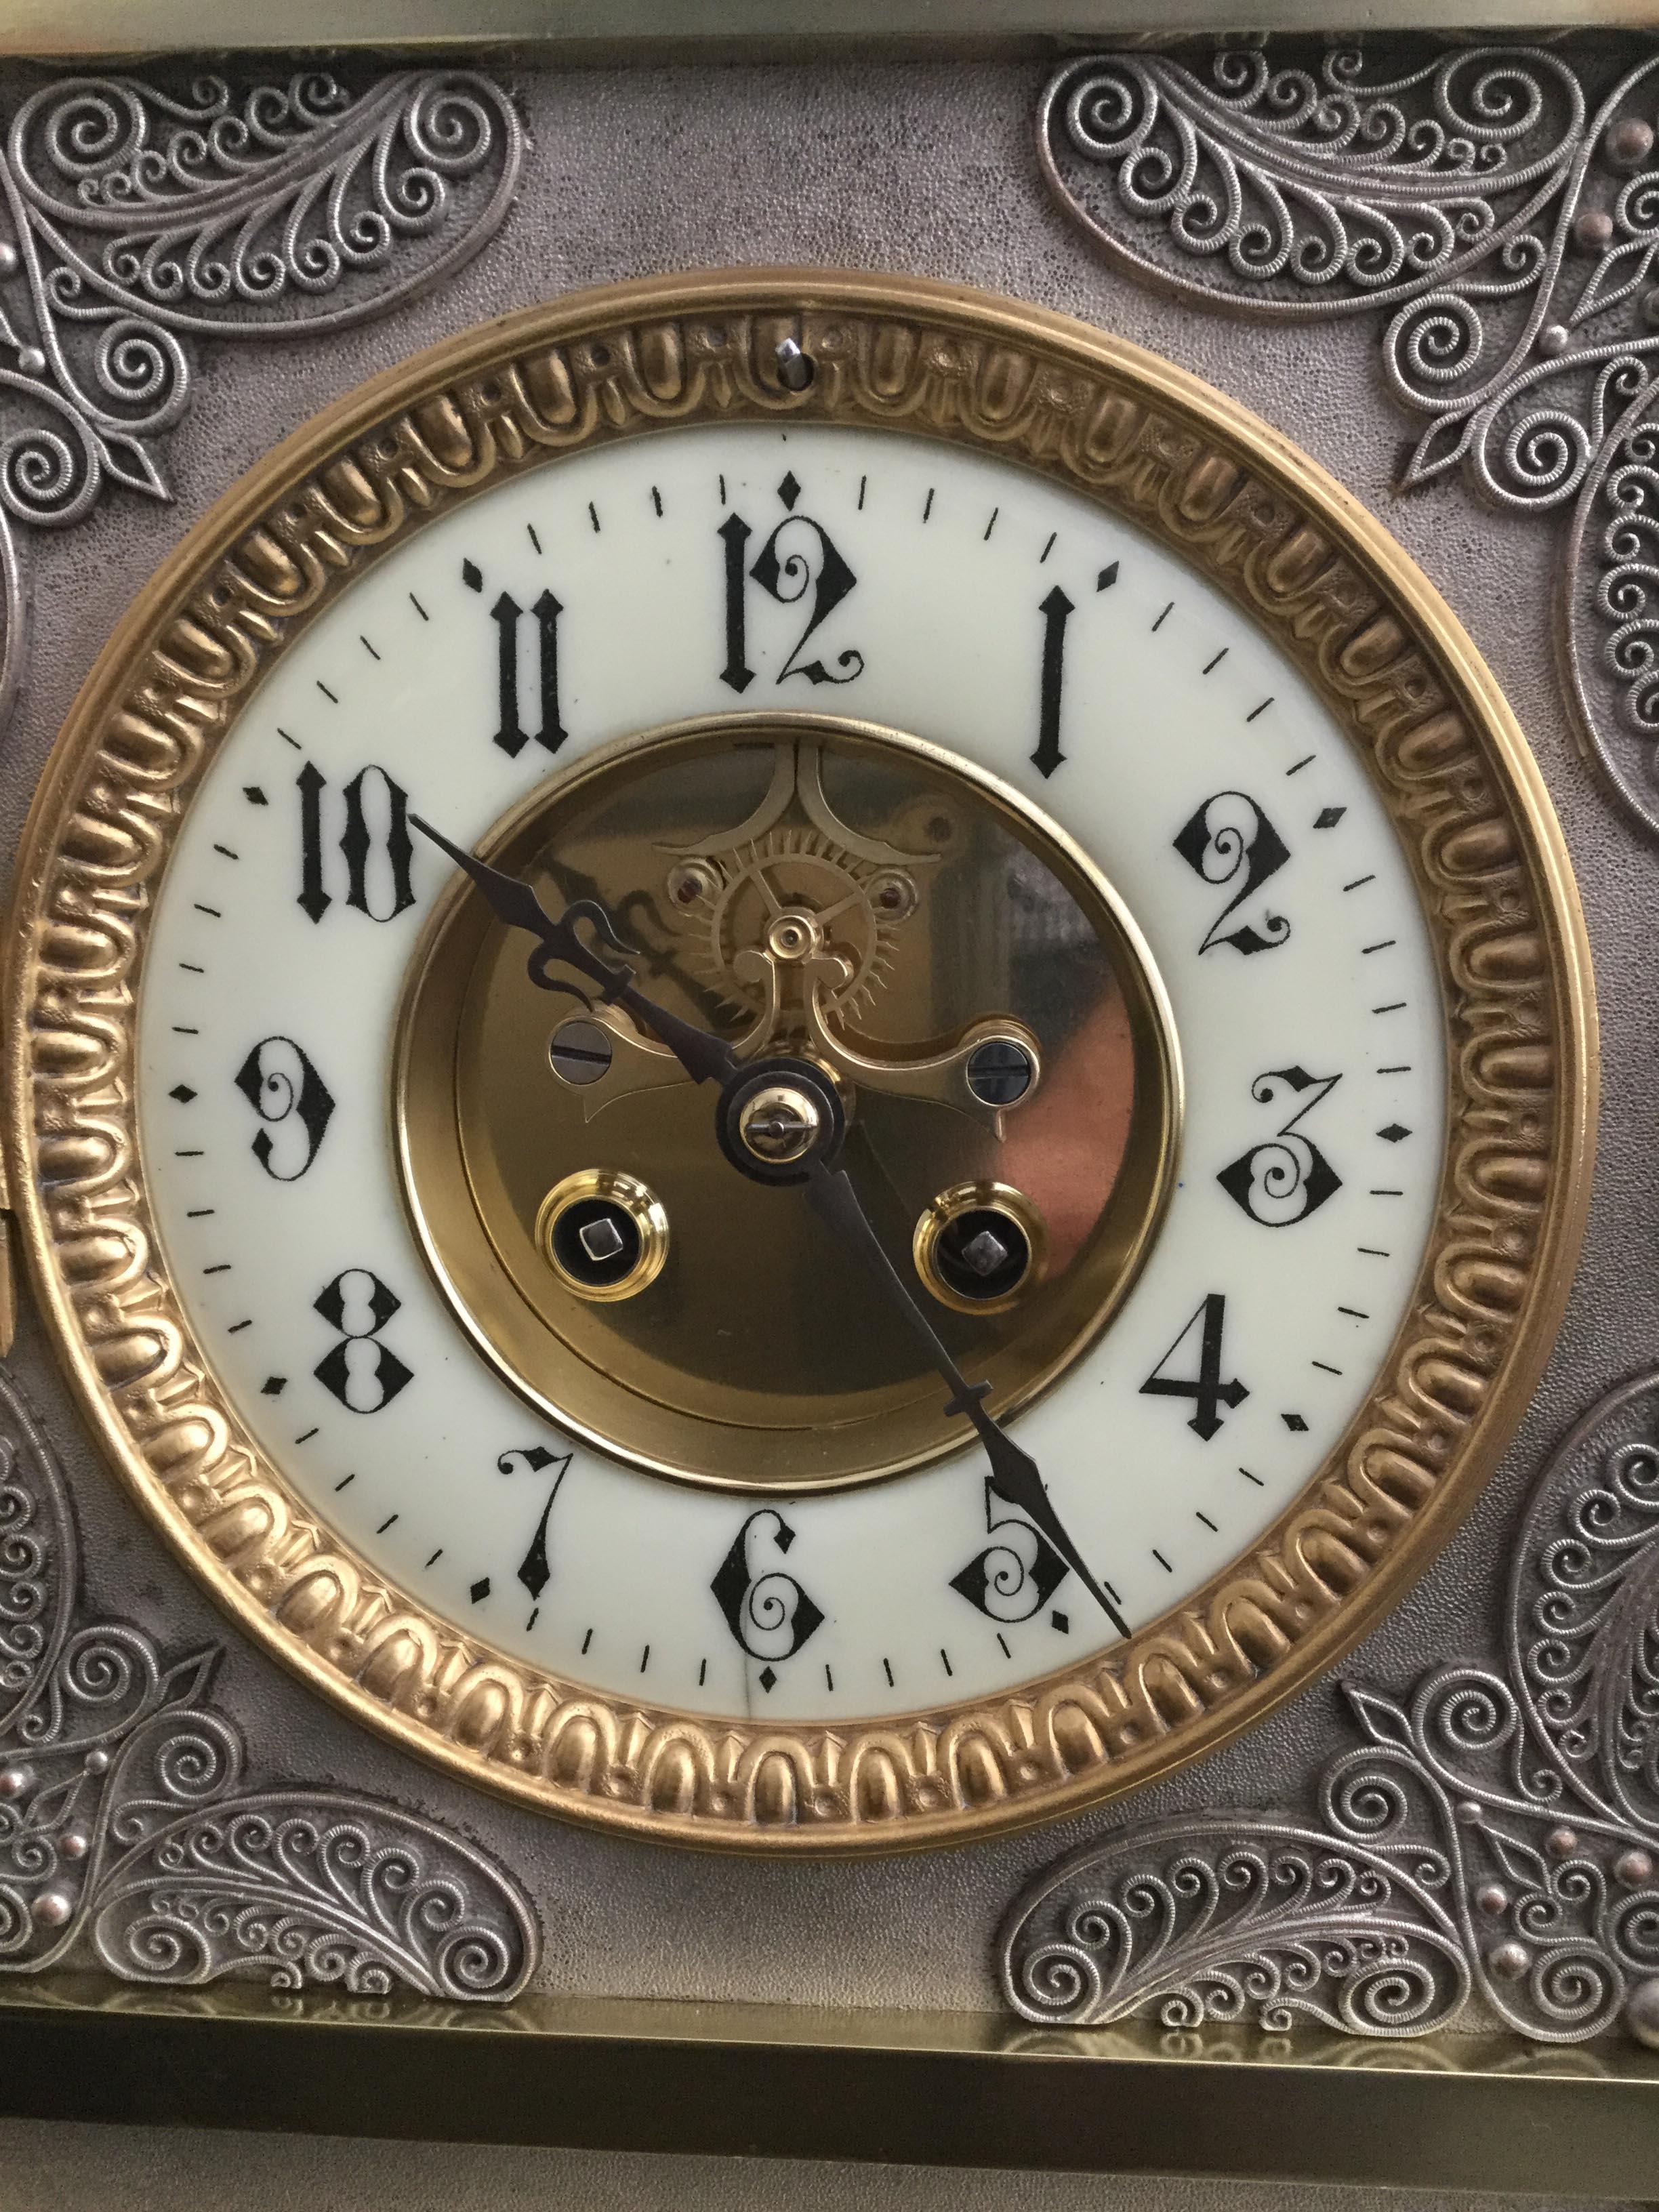 A rare French Gothic style mantel clock with brass case inset with decorative silvered panels profusely decorated in relief, surmounted to the corners by four brass and silvered orbs and a central frieze of 23 brass finials. Mounted on silvered ball